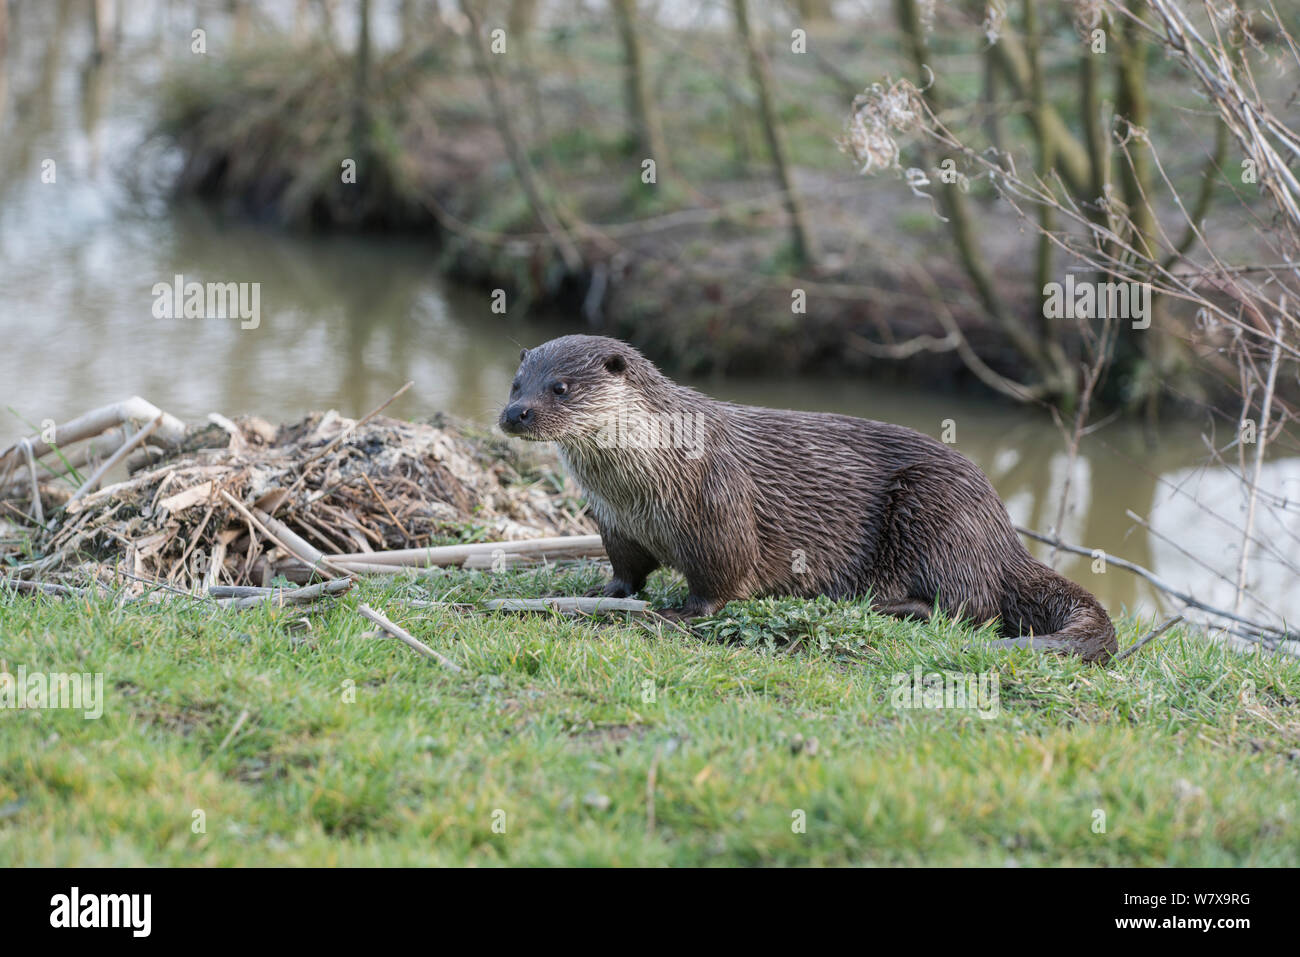 Otter (Lutra lutra), Captive. Occurs in Europe, Asia and North Africa. Stock Photo